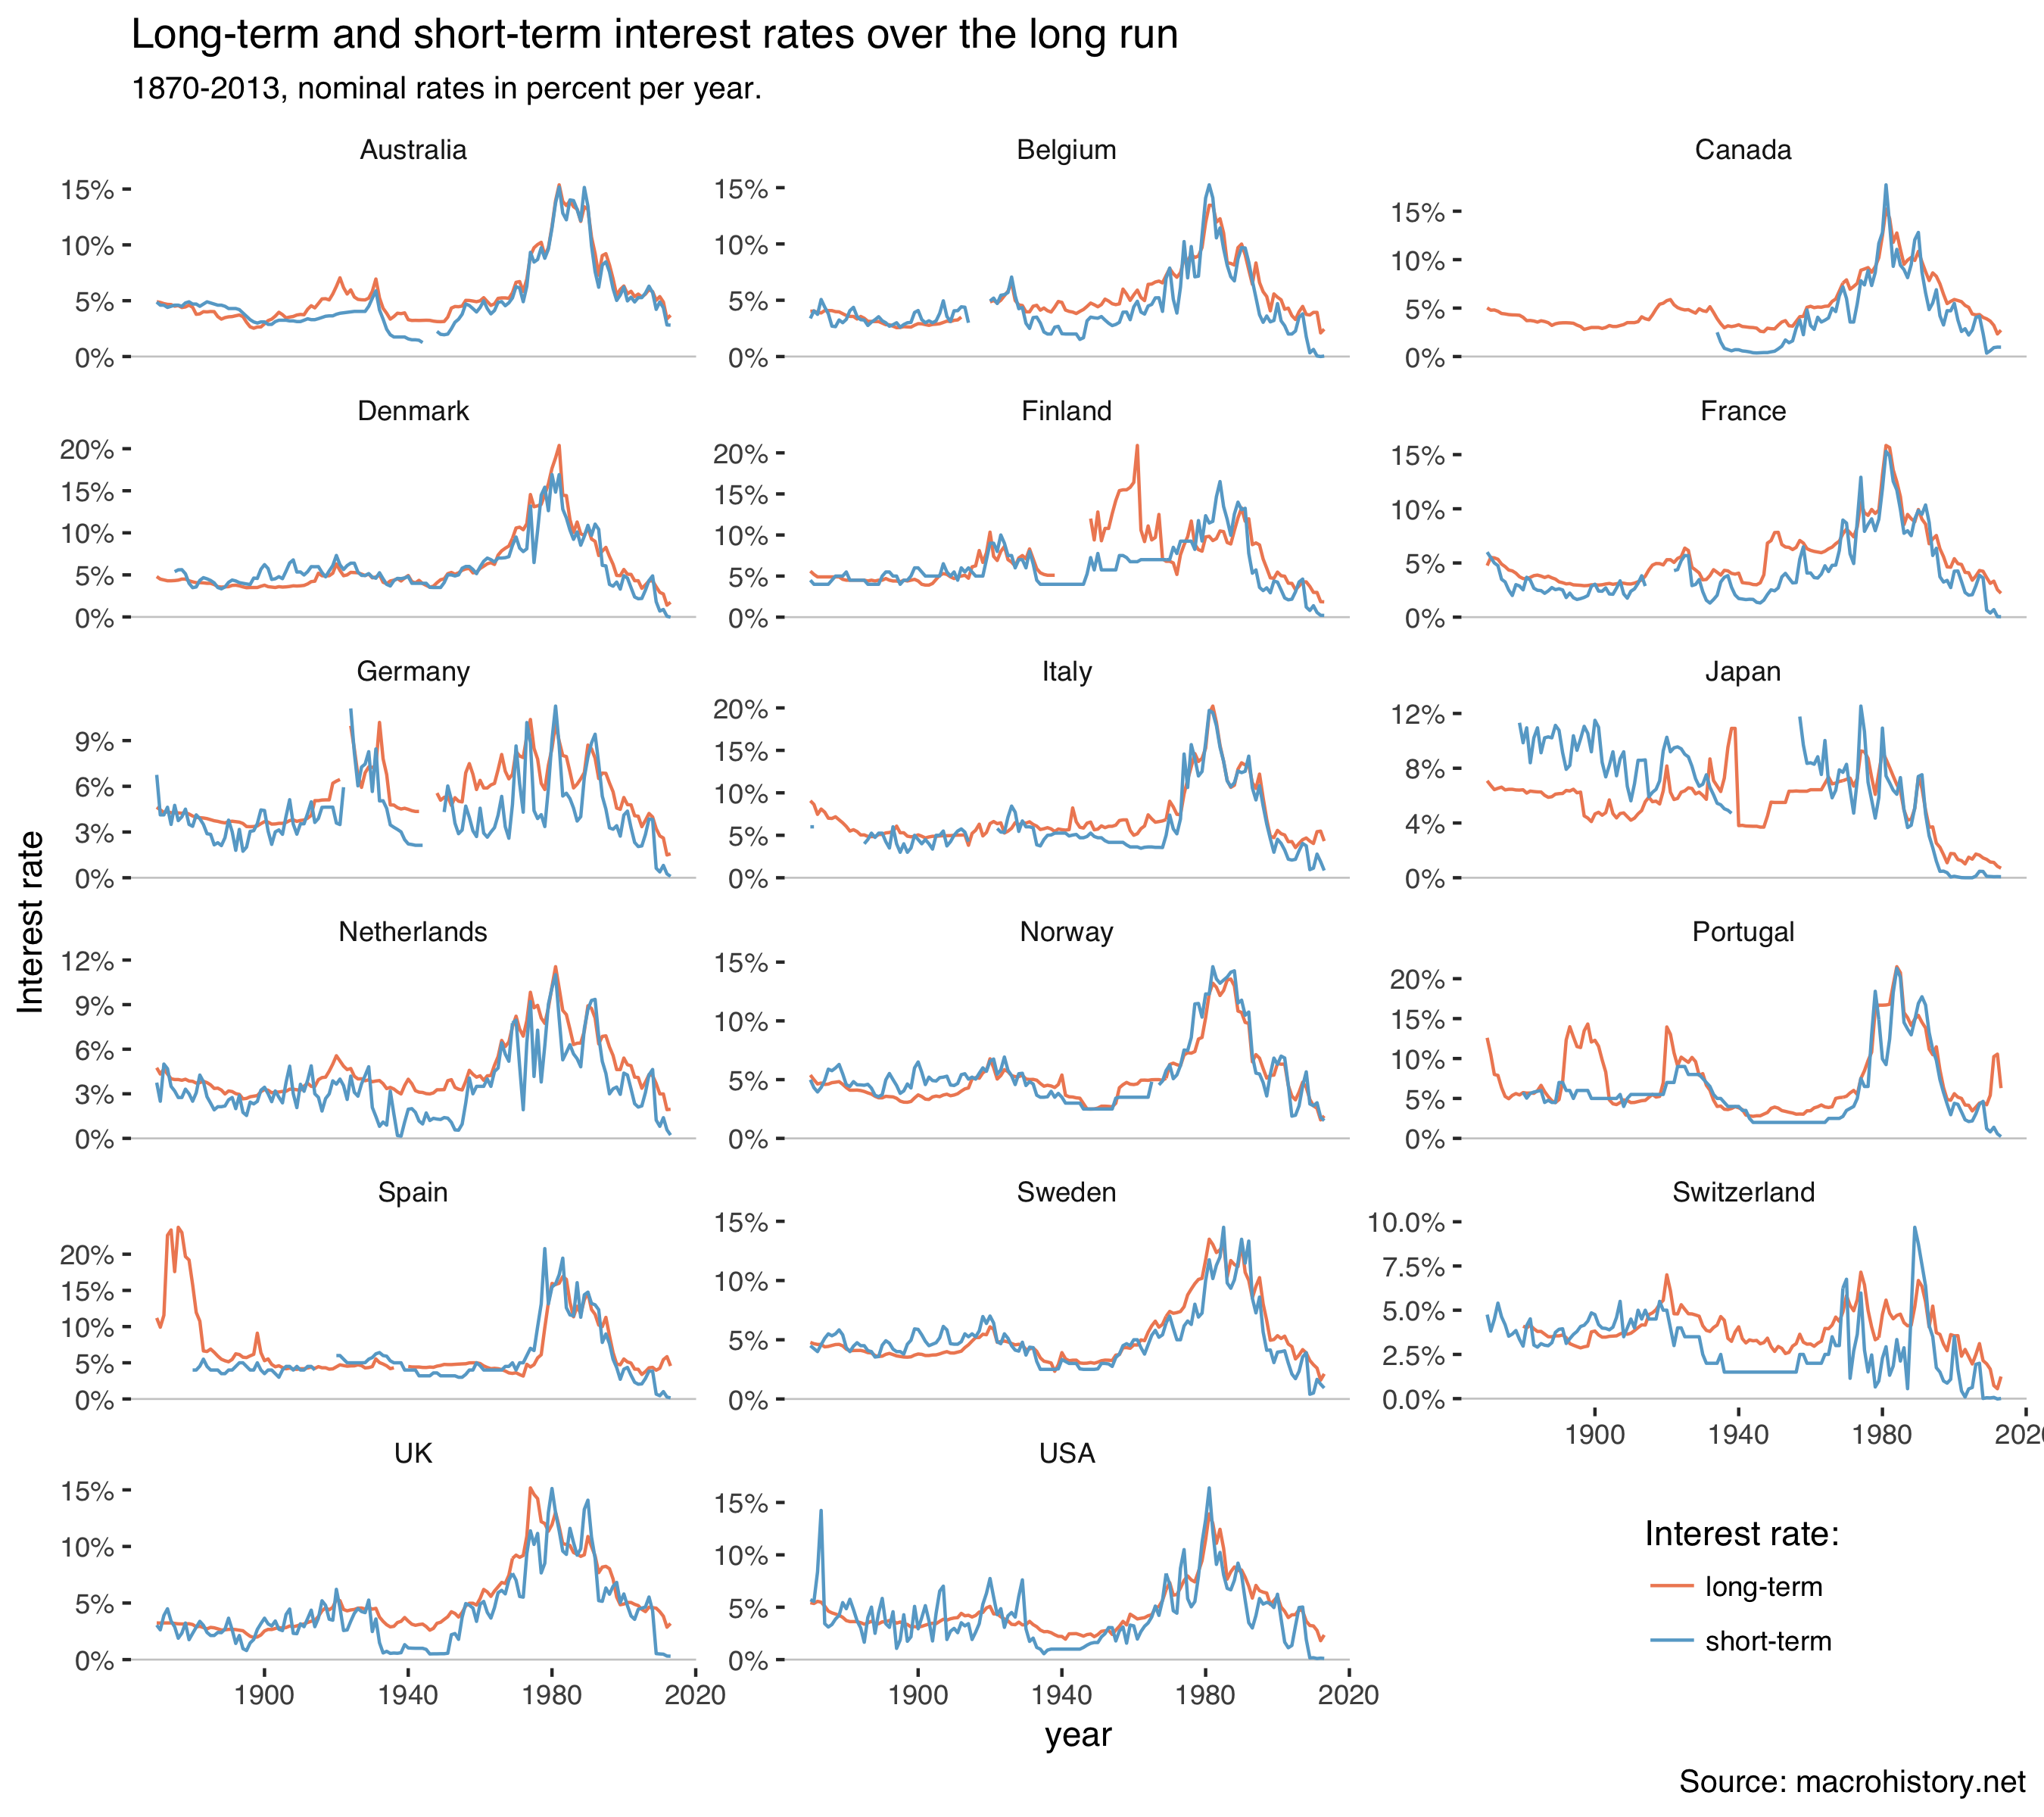 Long-term and short-term interest rates for 17 countries since 1870